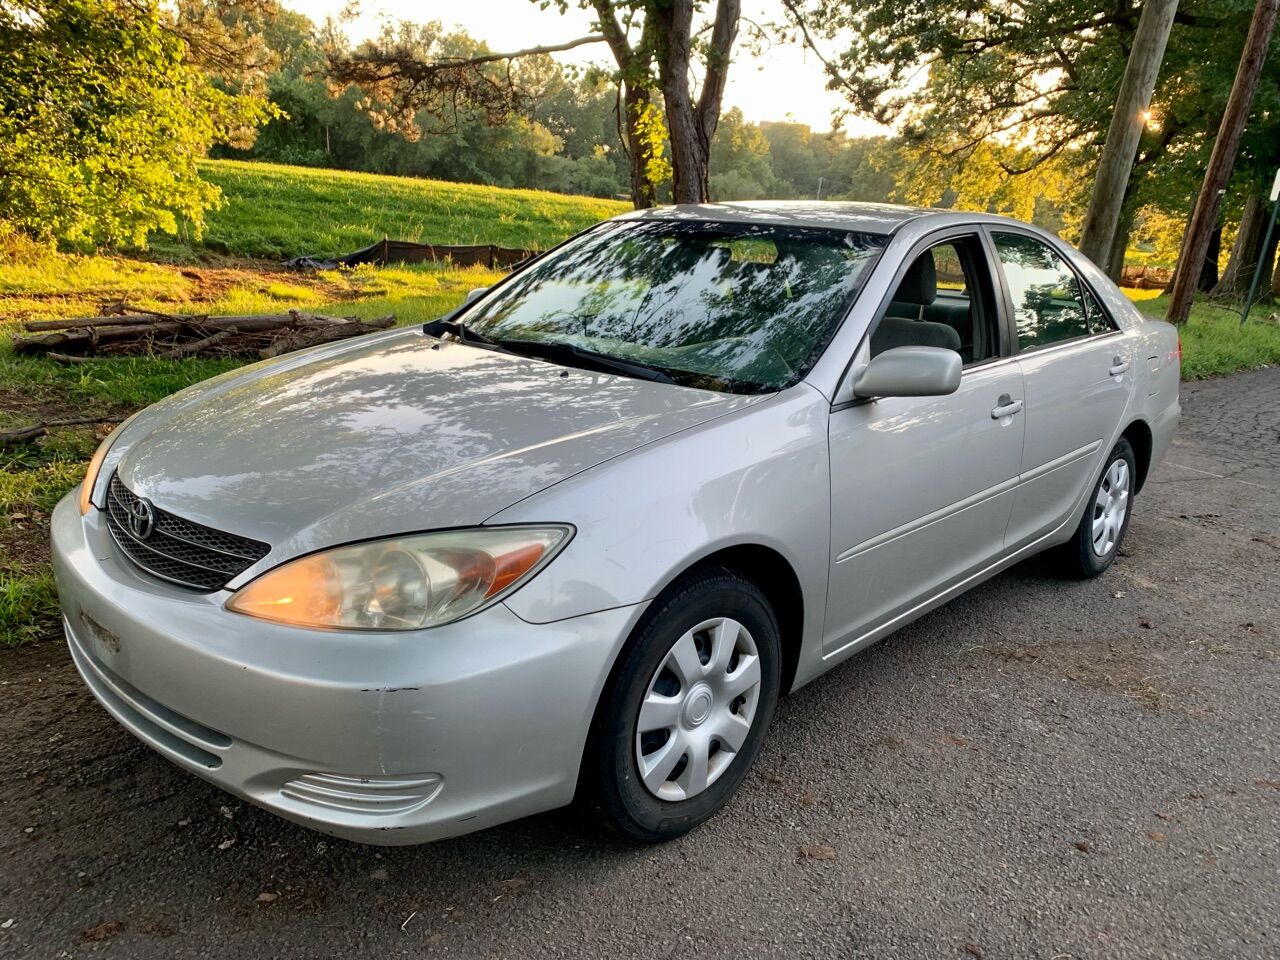 2004 Toyota Camry For Sale In Philadelphia, PA - Carsforsale.com®